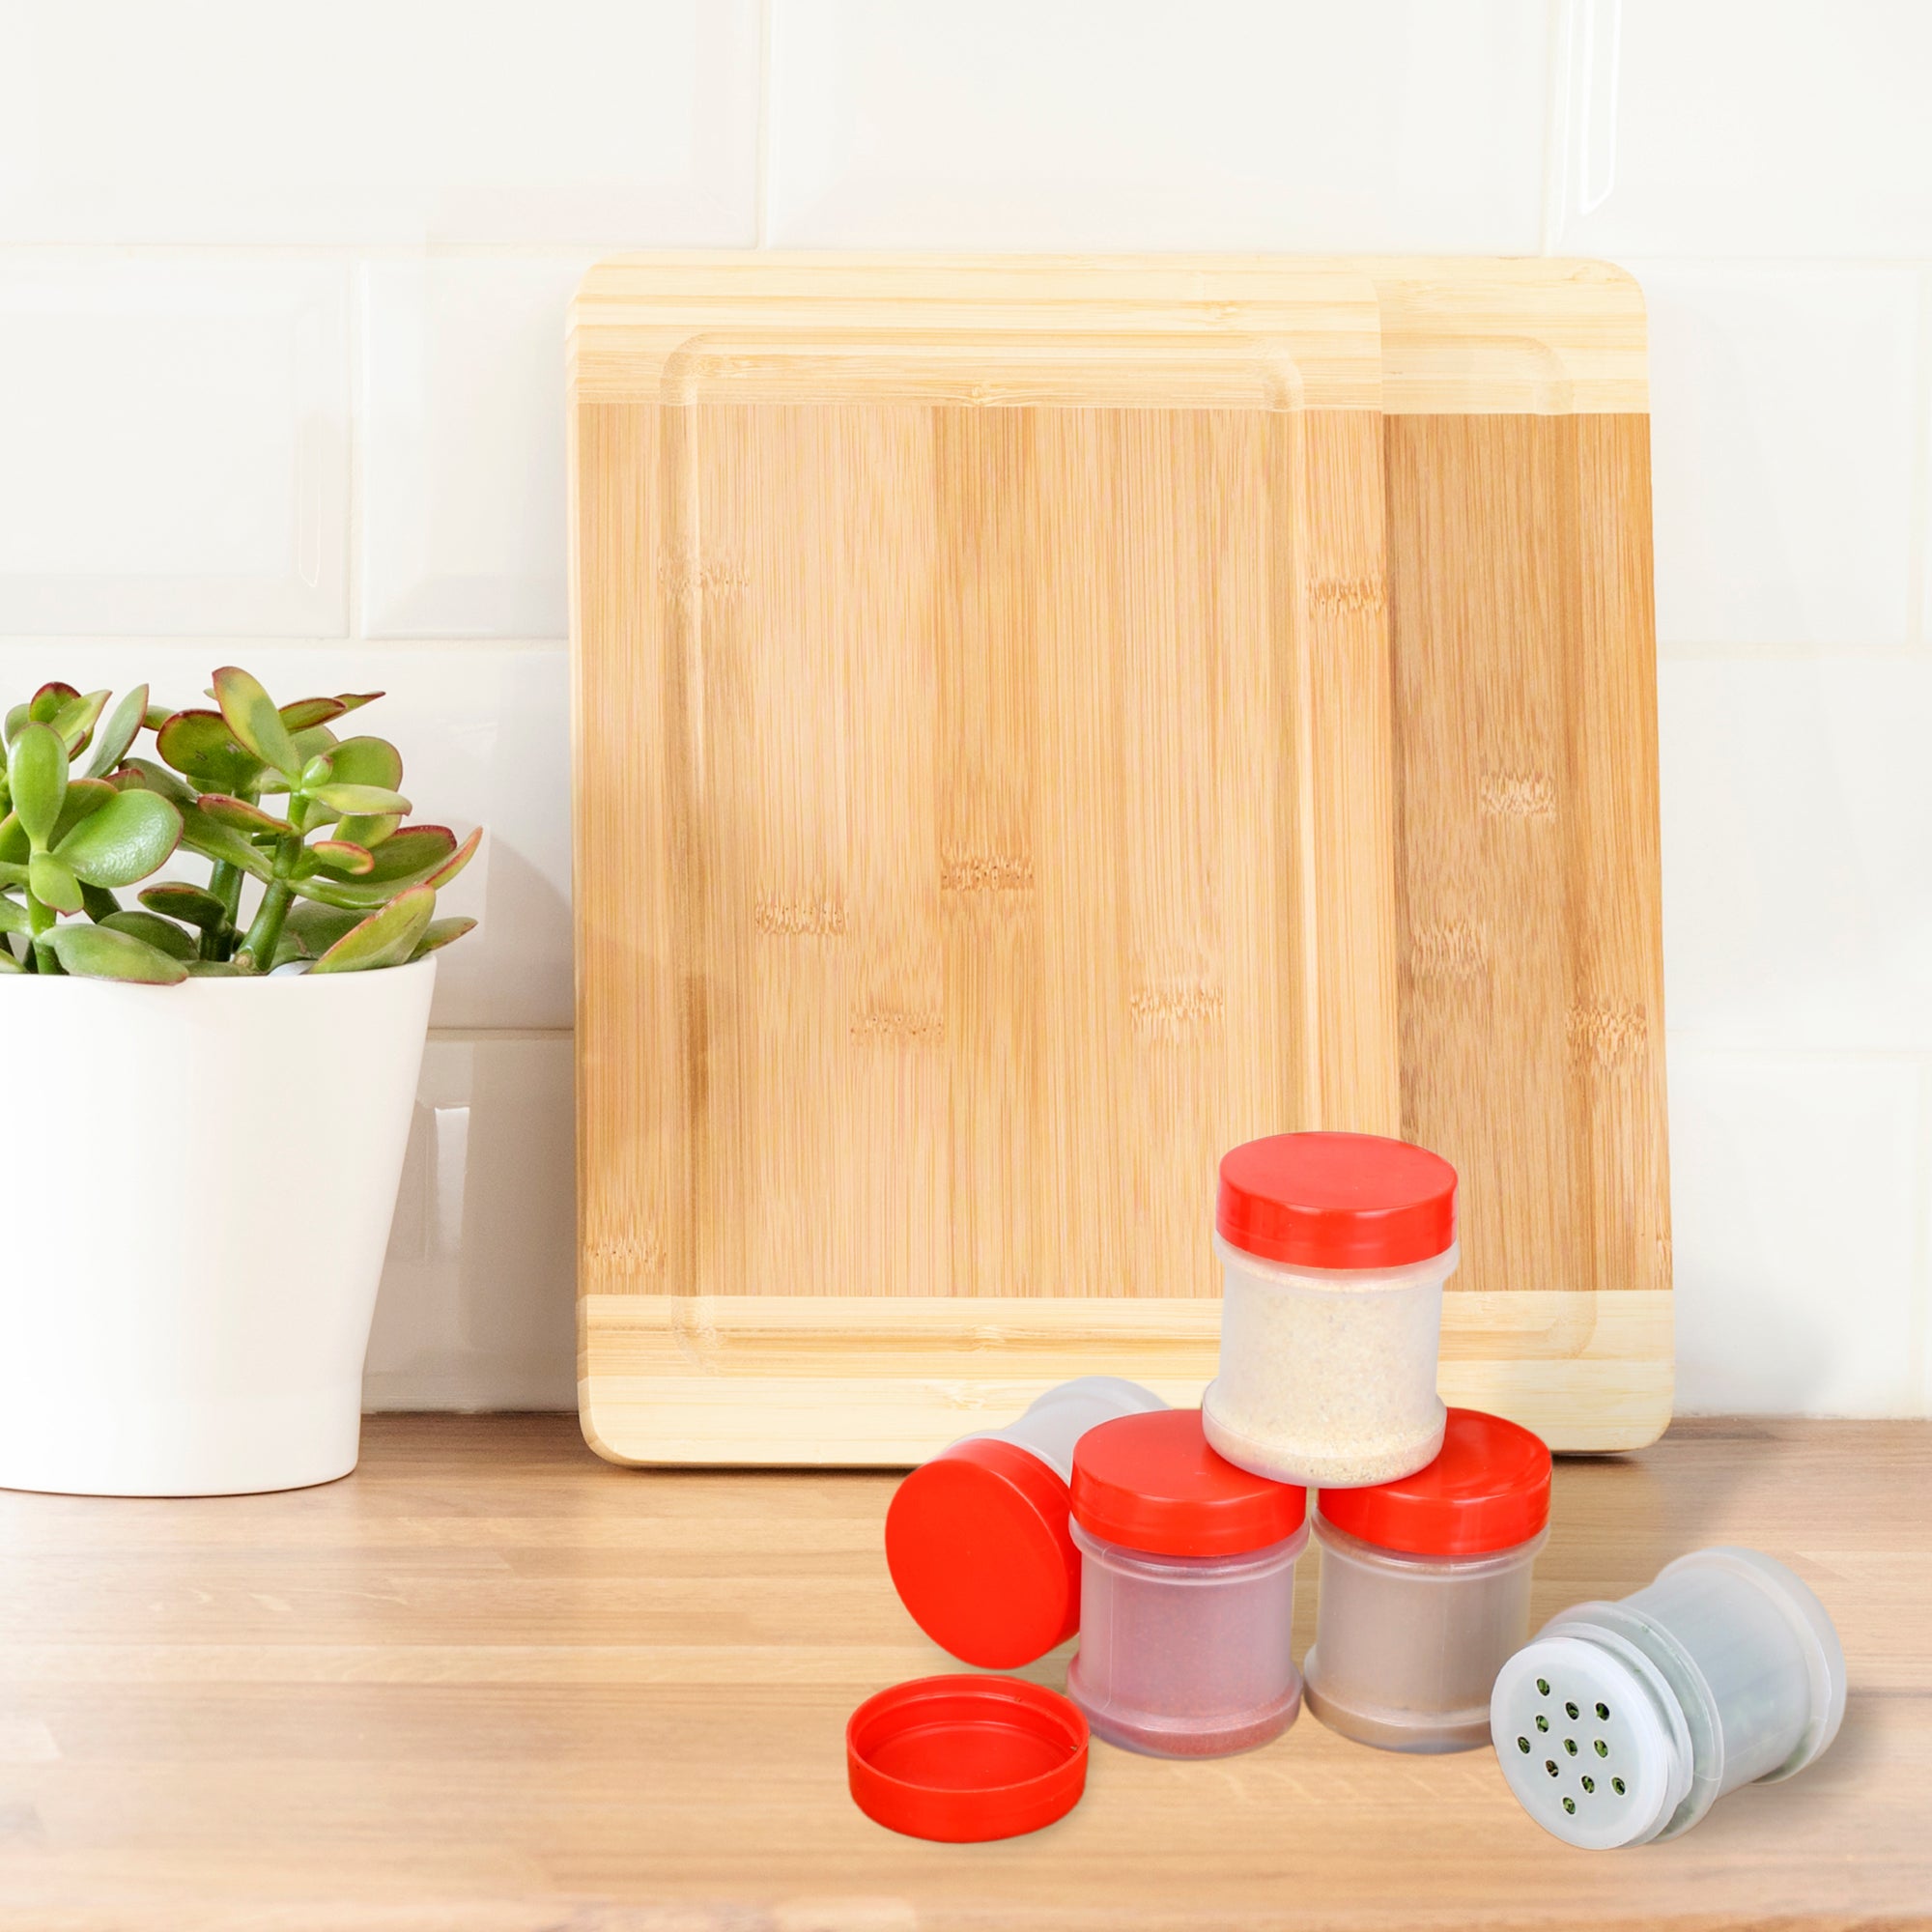 Cornucopia Brands-1oz Mini Plastic Spice Jars With Red Lids And Sifters  12pk : Target